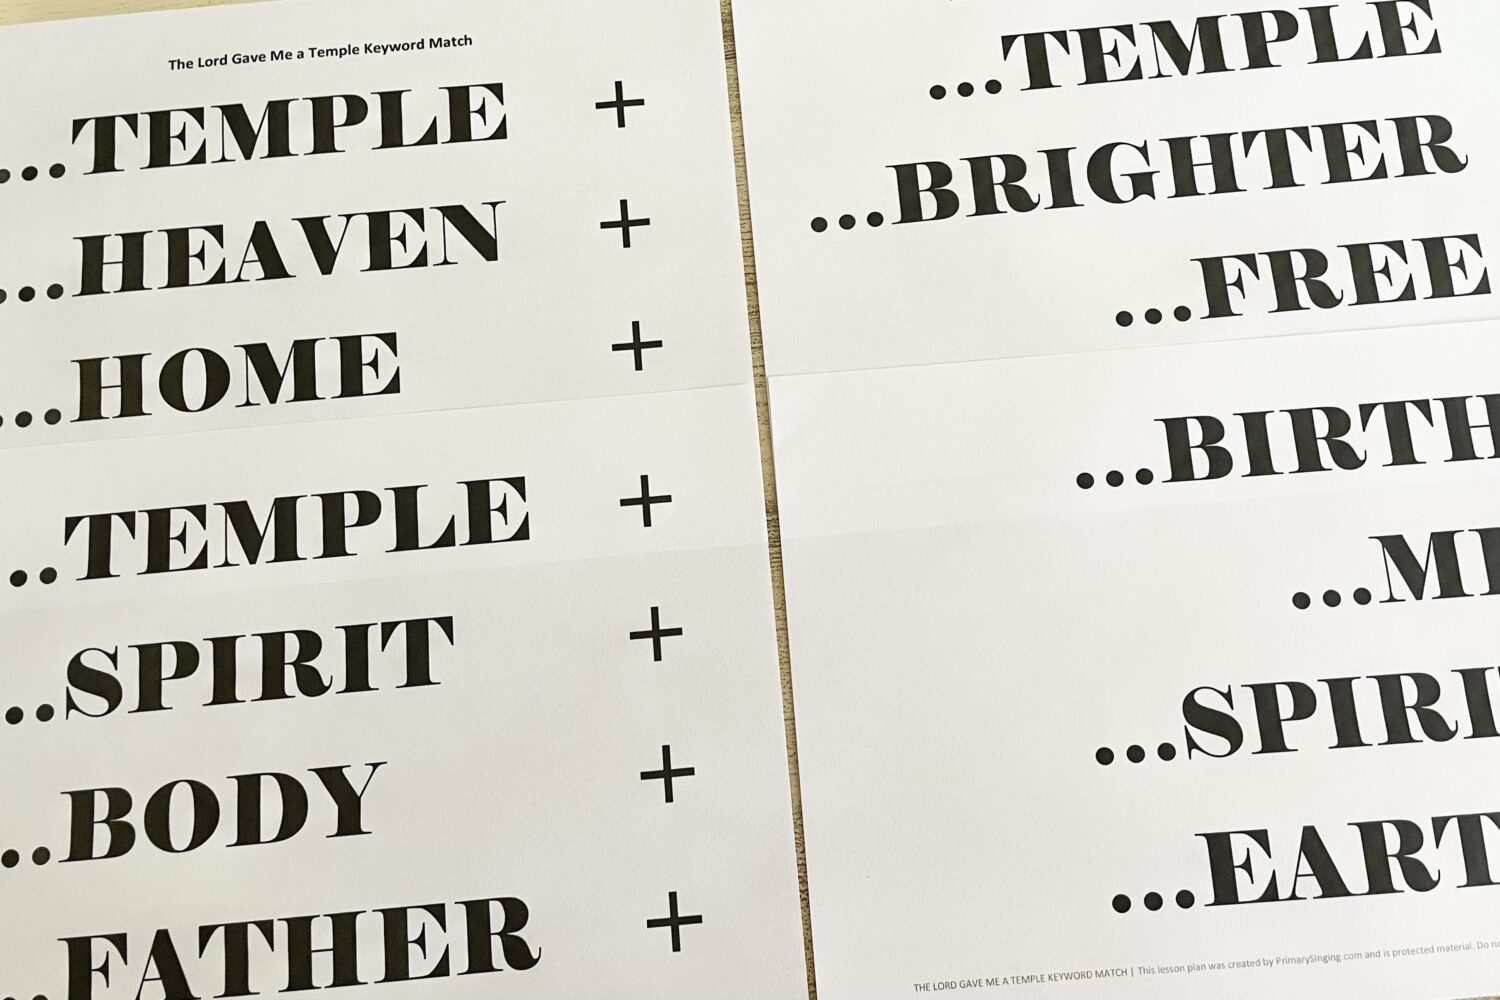 The Lord Gave Me a Temple Keyword Match! Use this fun, logical matching activity to review this song. Match keywords at beginning and end of phrases. Printable matching game for LDS Primary Music Leaders.